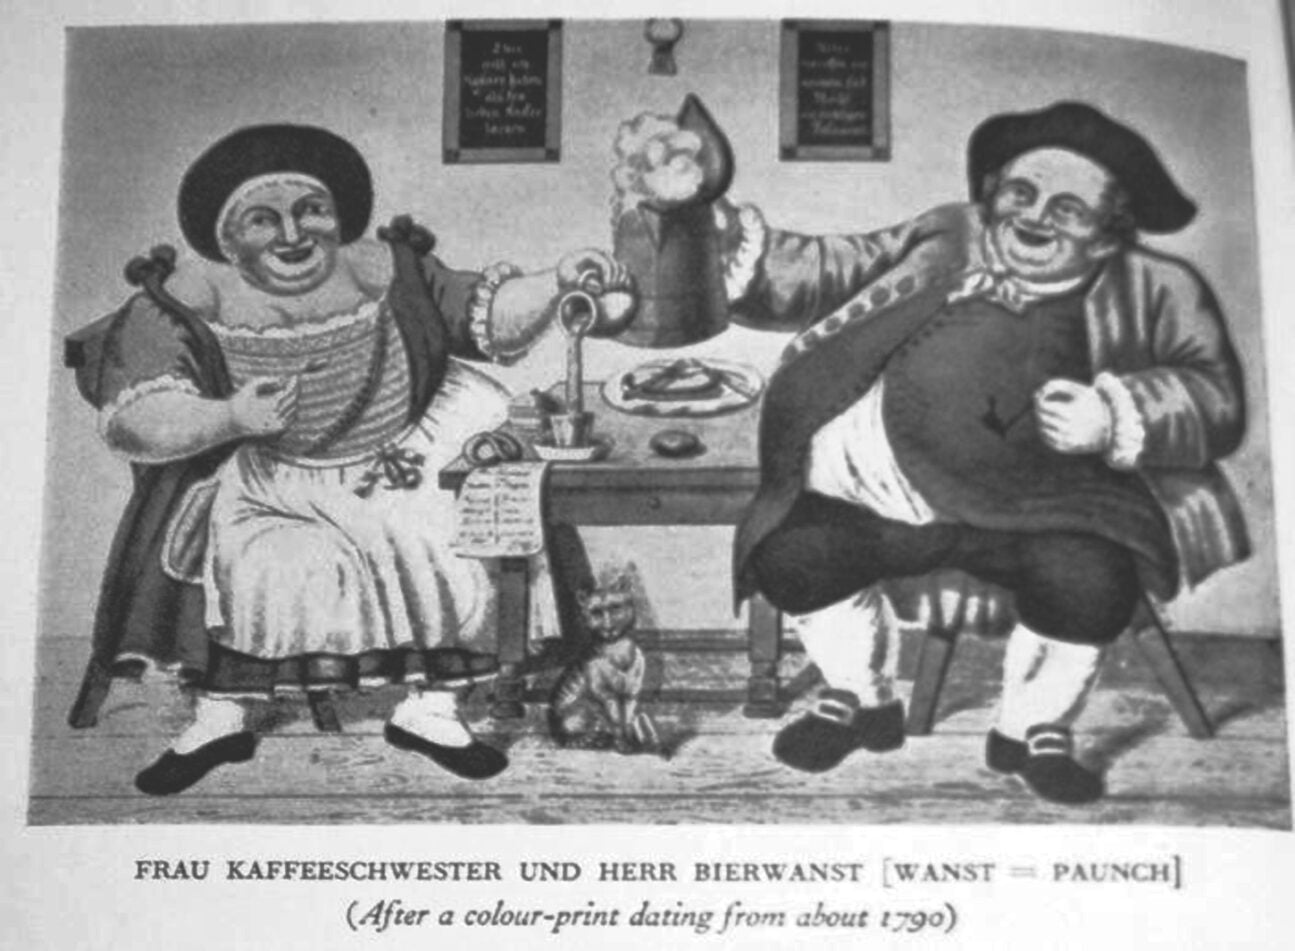 A cartoon from around 1790 shows a distinctly well-nourished pair of townsfolk labeled Frau Kaffeeschwester, Madam Coffee-sister, and Herrn Bierwanst, Mr Beer-belly